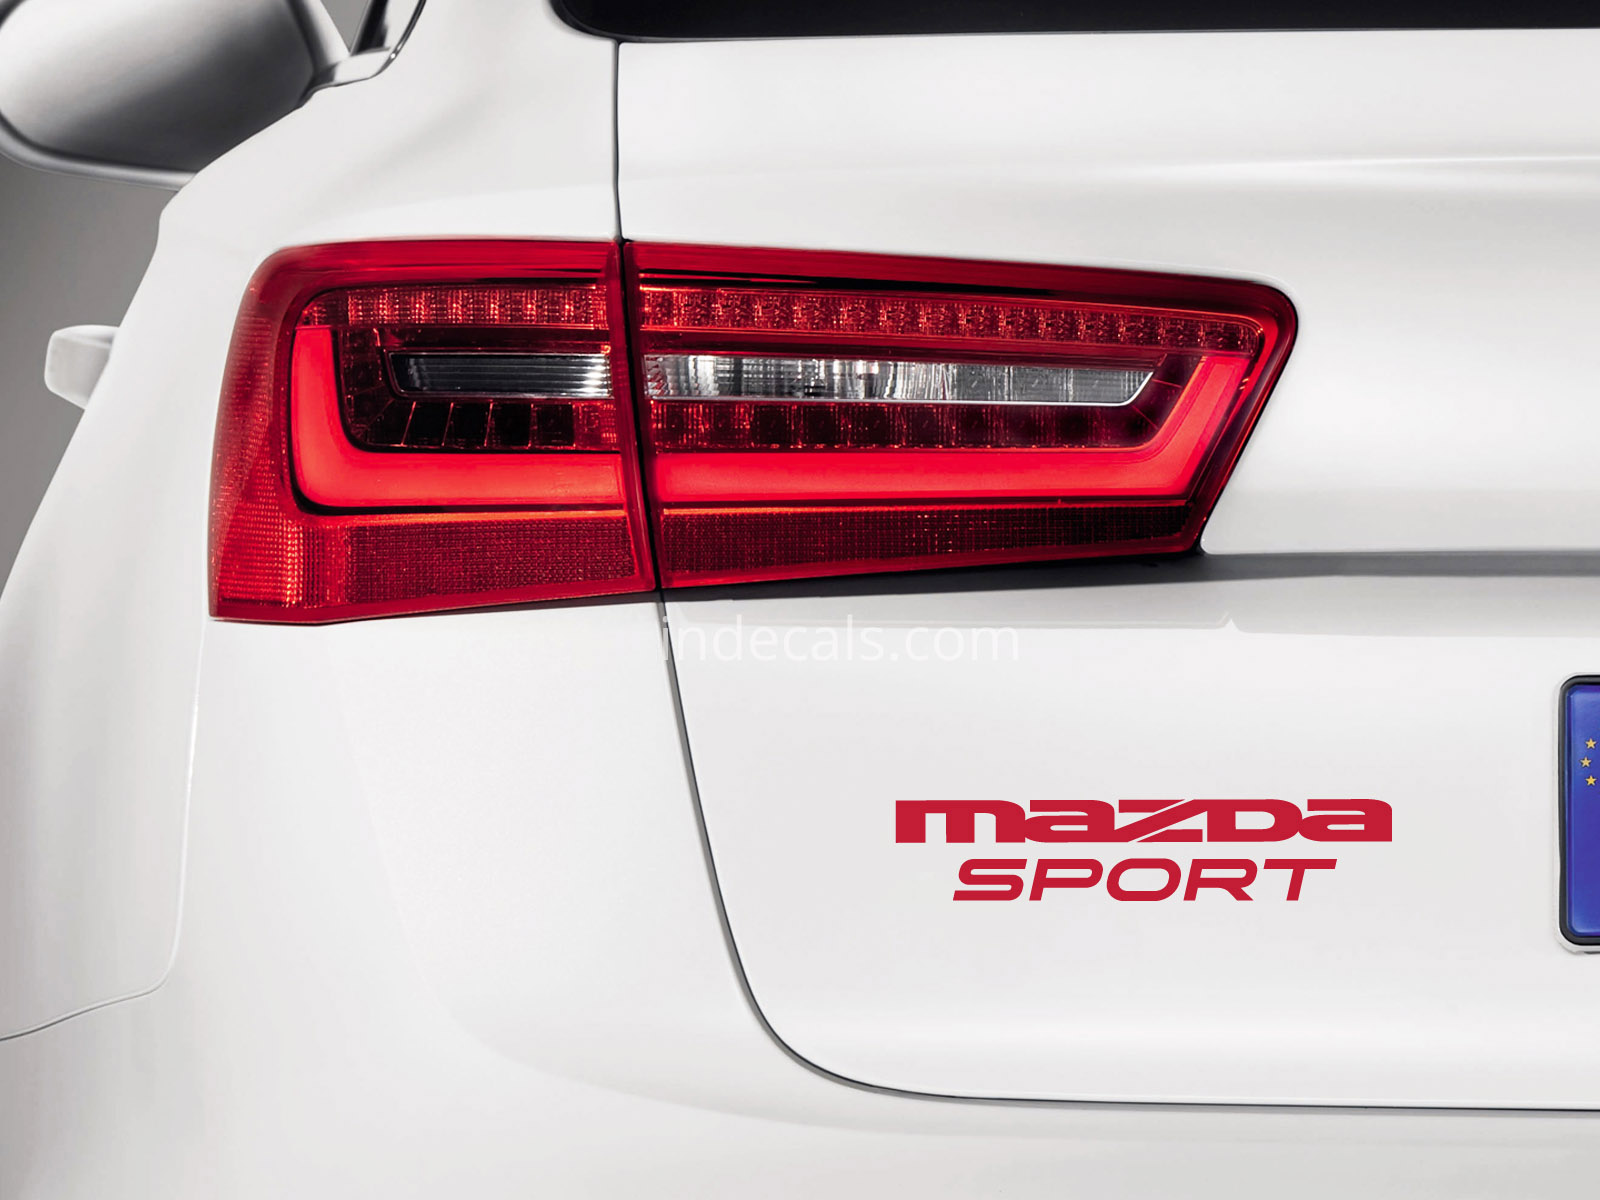 1 x Mazda Sports Sticker for Trunk - Red